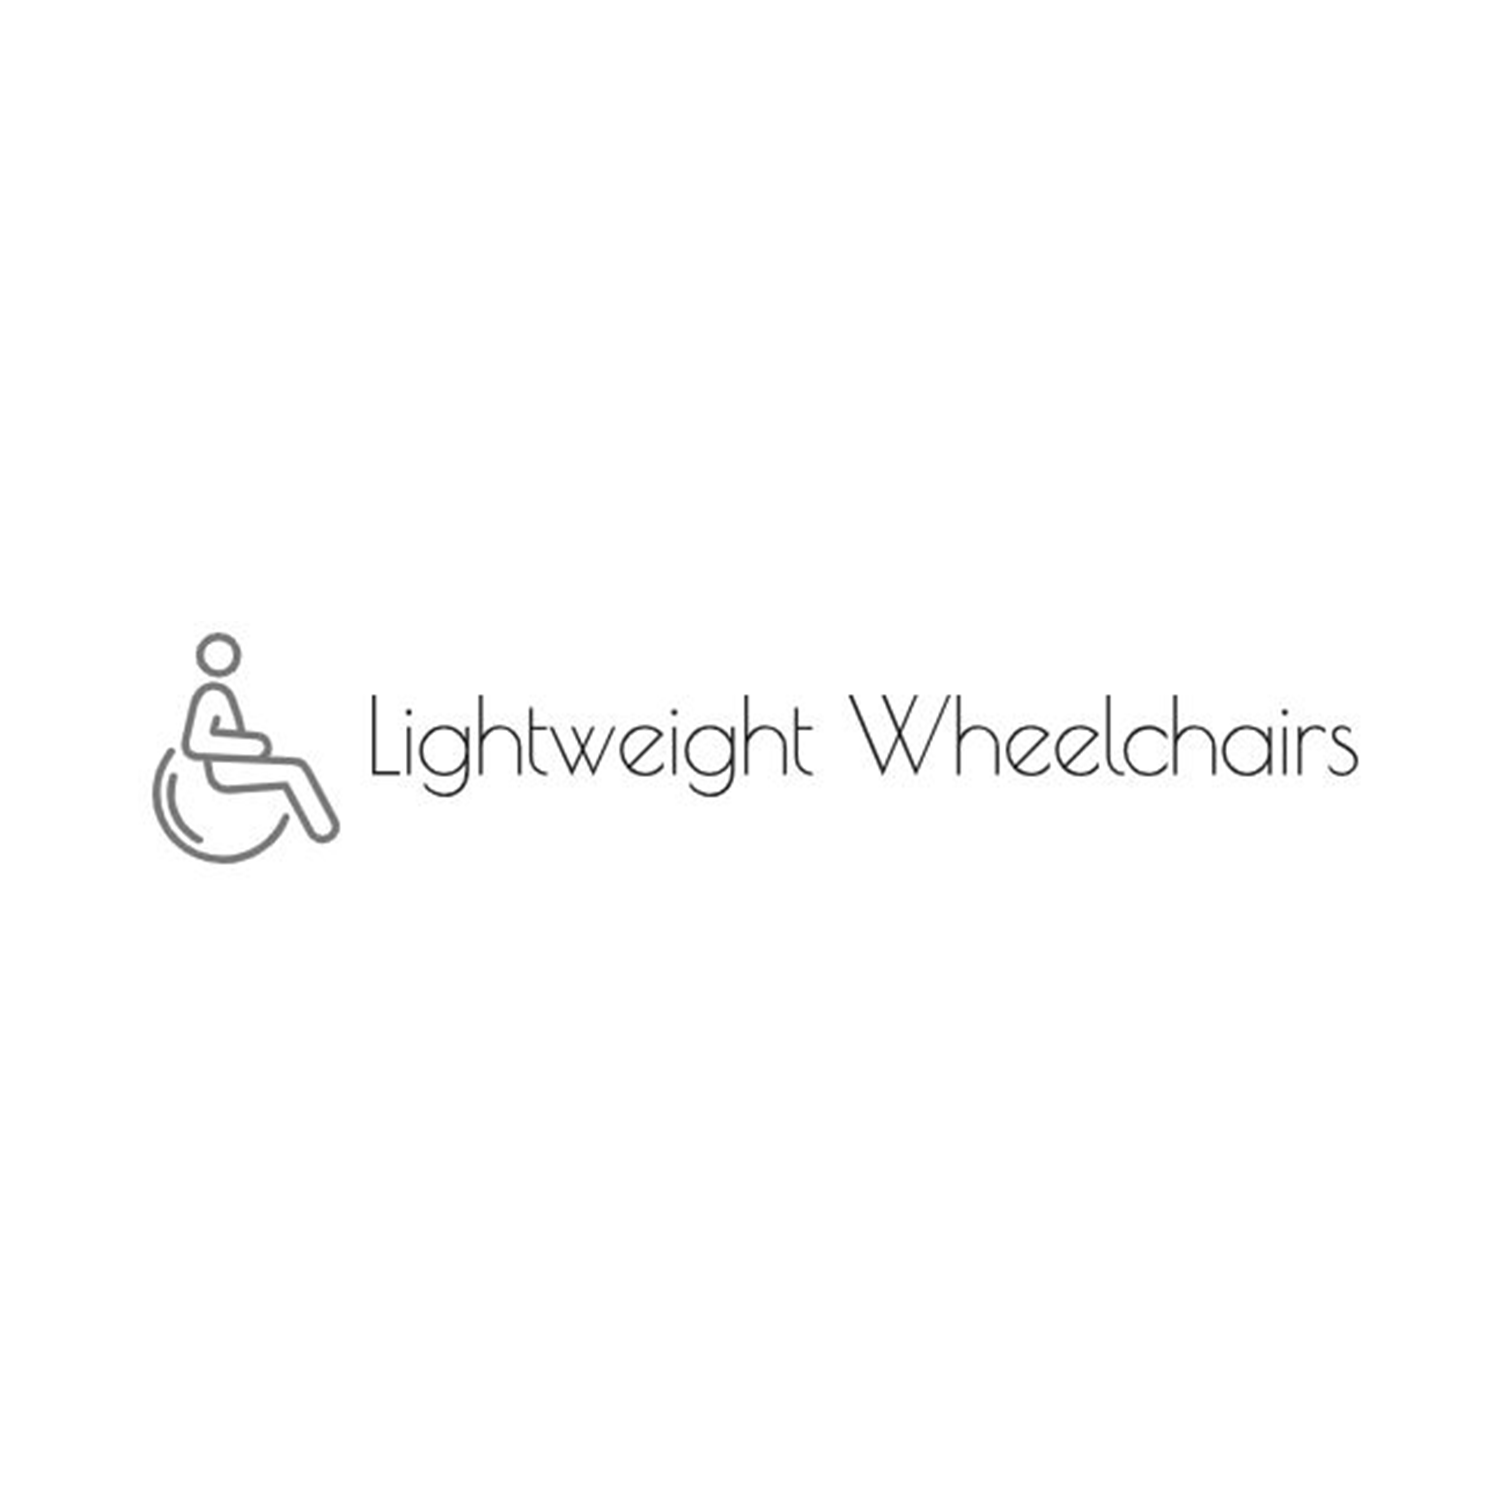 Discover the Benefits of Lightweight Wheelchairs for Comfort and Mobility